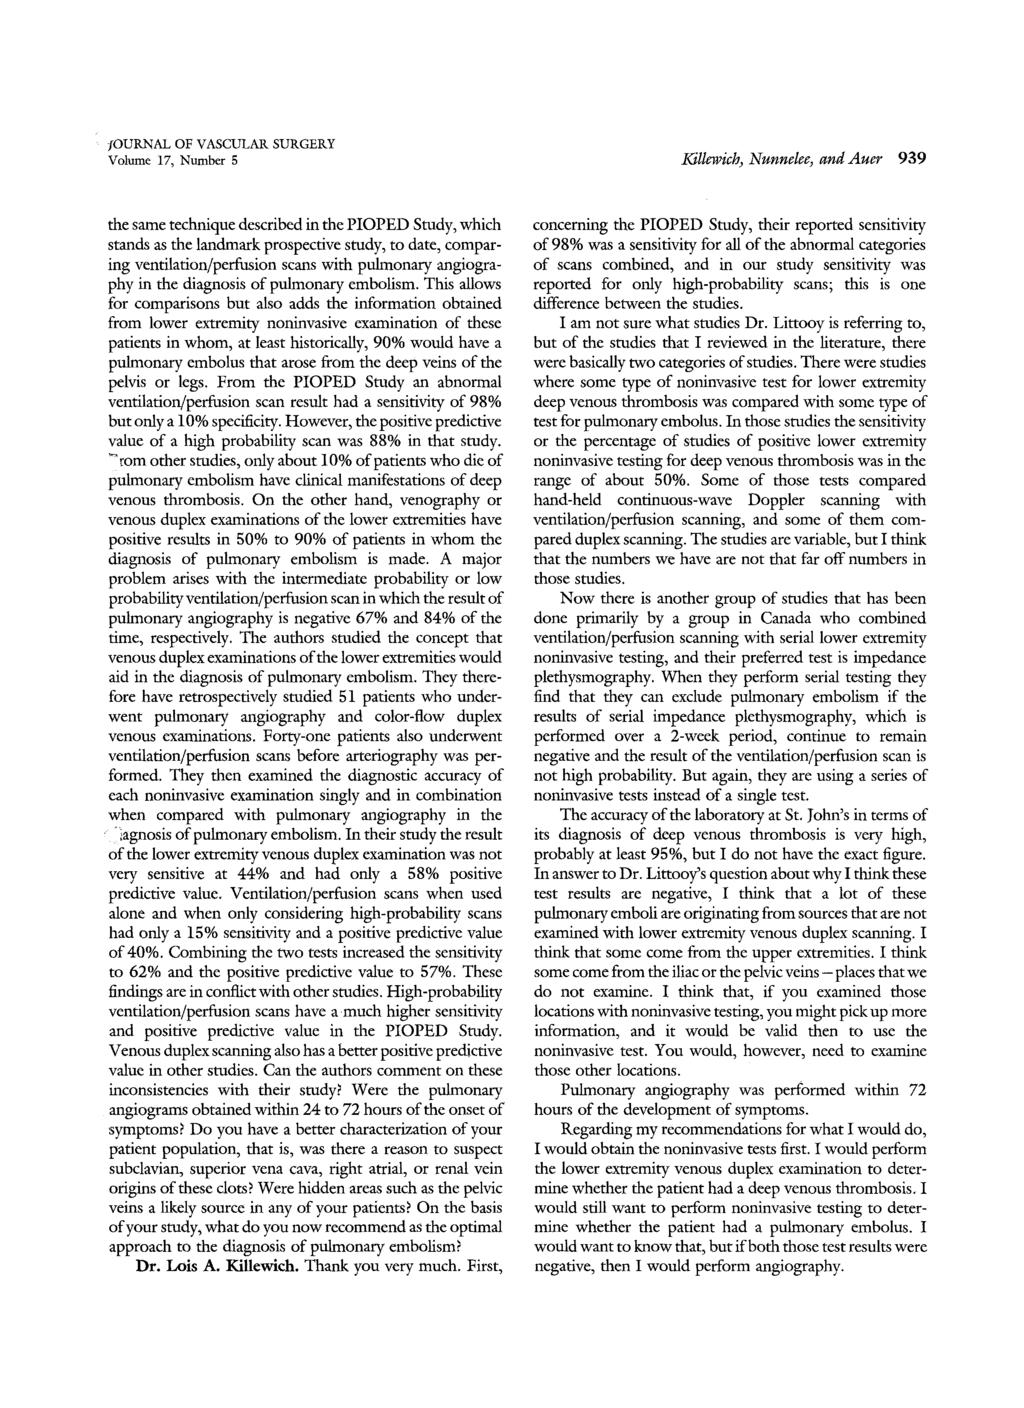 :/OURNAL OF VASCULAR SURGERY Volume 17, Number 5 IGllewich, Nunnelee, and Auer 939 the same technique described in the PIOPED Study, which stands as the landmark prospective study, to date, comparing